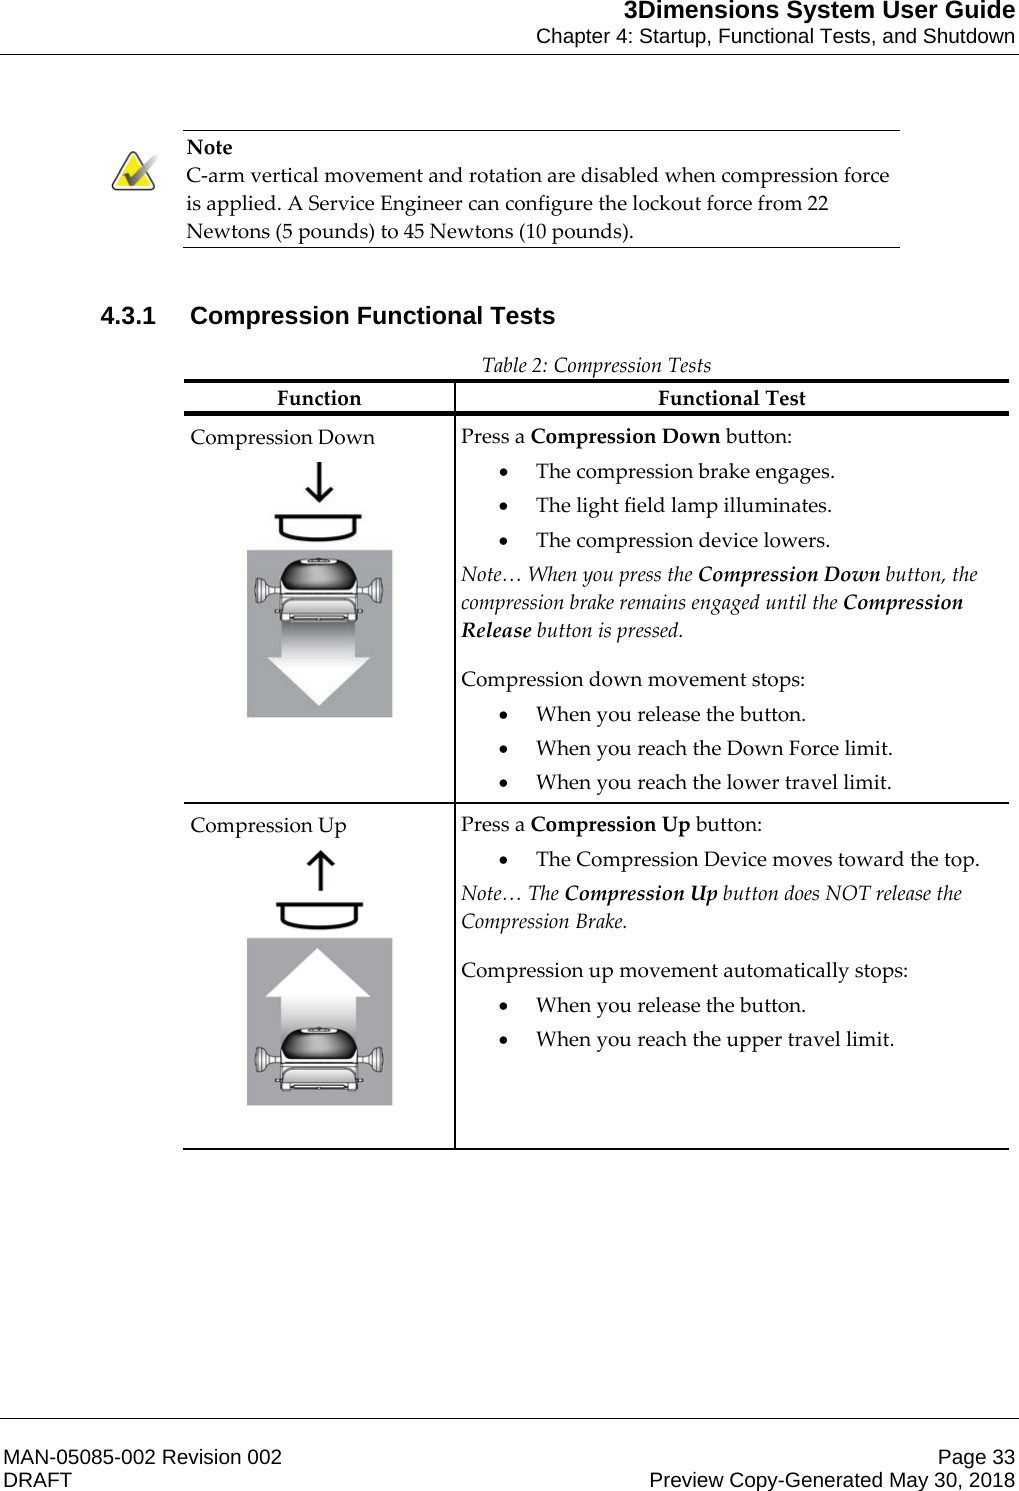 3Dimensions System User GuideChapter 4: Startup, Functional Tests, and ShutdownMAN-05085-002 Revision 002 Page 33DRAFT Preview Copy-Generated May 30, 2018Note C-arm vertical movement and rotation are disabled when compression force is applied. A Service Engineer can configure the lockout force from 22 Newtons (5 pounds) to 45 Newtons (10 pounds).  4.3.1 Compression Functional Tests Table 2: Compression Tests Function Functional Test Compression Down  Press a Compression Down button: xThe compression brake engages. xThe light field lamp illuminates. xThe compression device lowers. Note… When you press the Compression Down button, the compression brake remains engaged until the Compression Release button is pressed.  Compression down movement stops: xWhen you release the button. xWhen you reach the Down Force limit. xWhen you reach the lower travel limit. Compression Up  Press a Compression Up button: xThe Compression Device moves toward the top. Note… The Compression Up button does NOT release the Compression Brake.  Compression up movement automatically stops: xWhen you release the button. xWhen you reach the upper travel limit.    